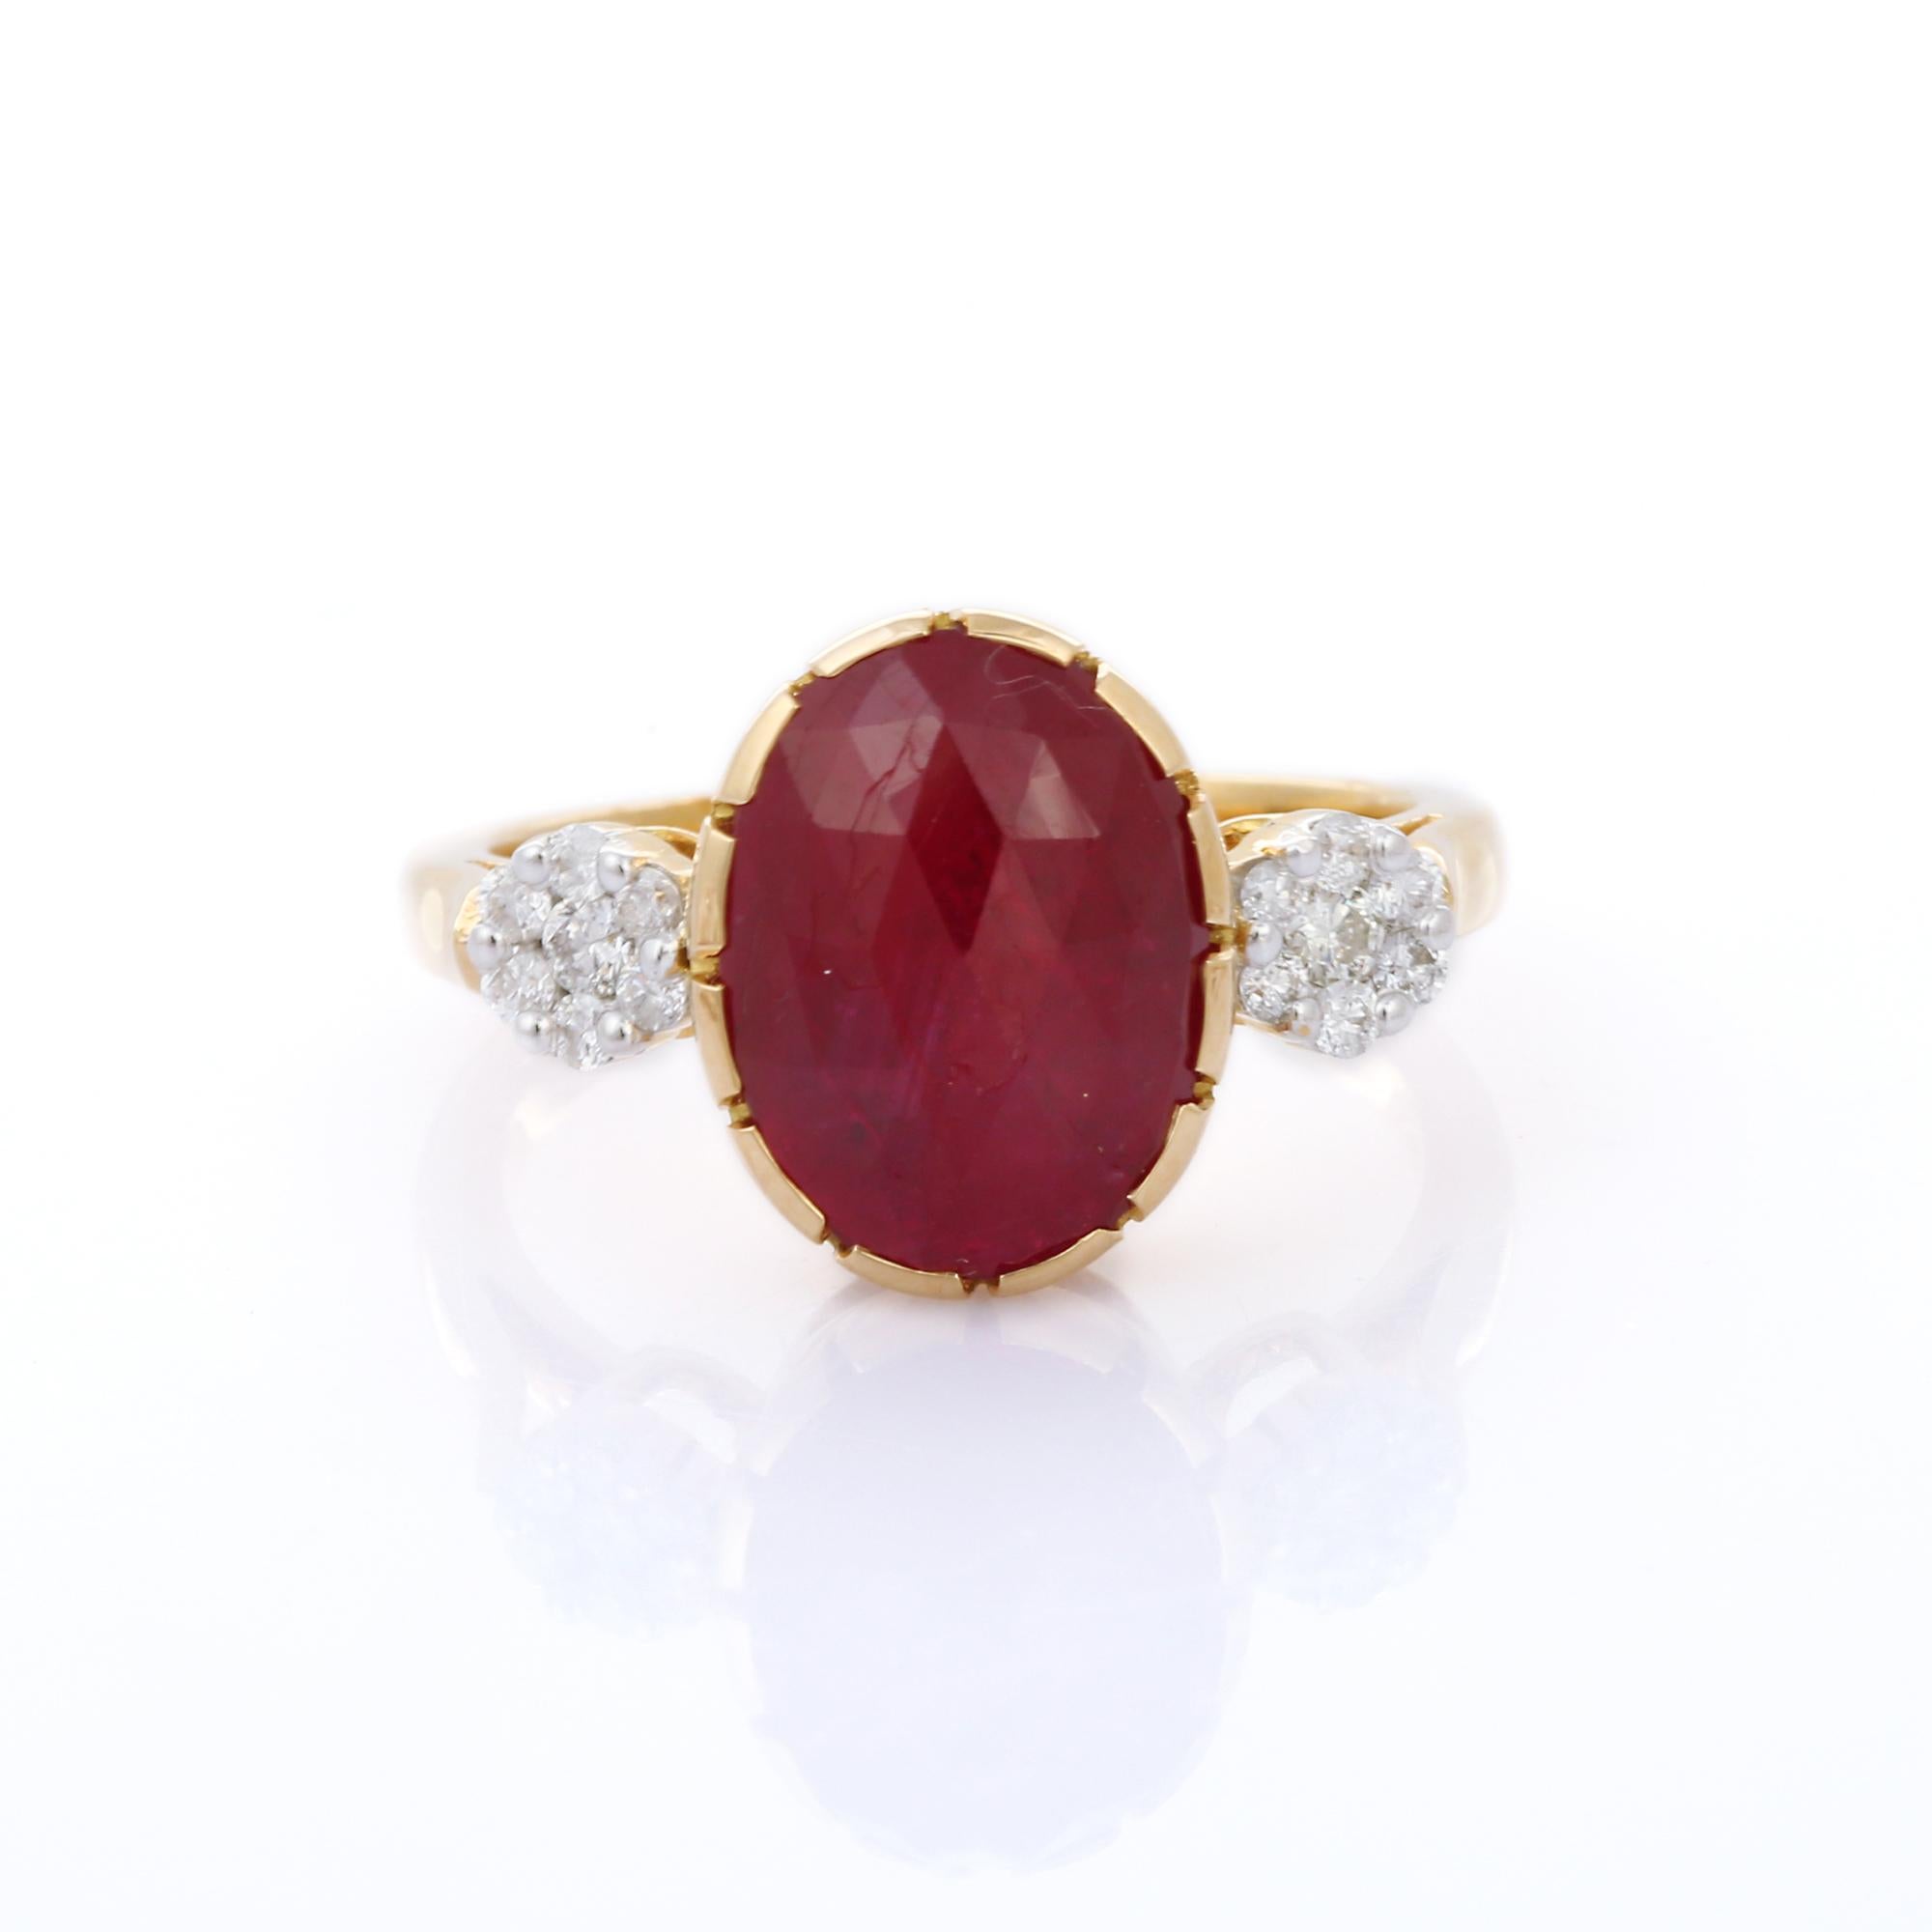 For Sale:  2.92 Carat Red Ruby and Diamond Engagement Ring in 18K Yellow Gold  10